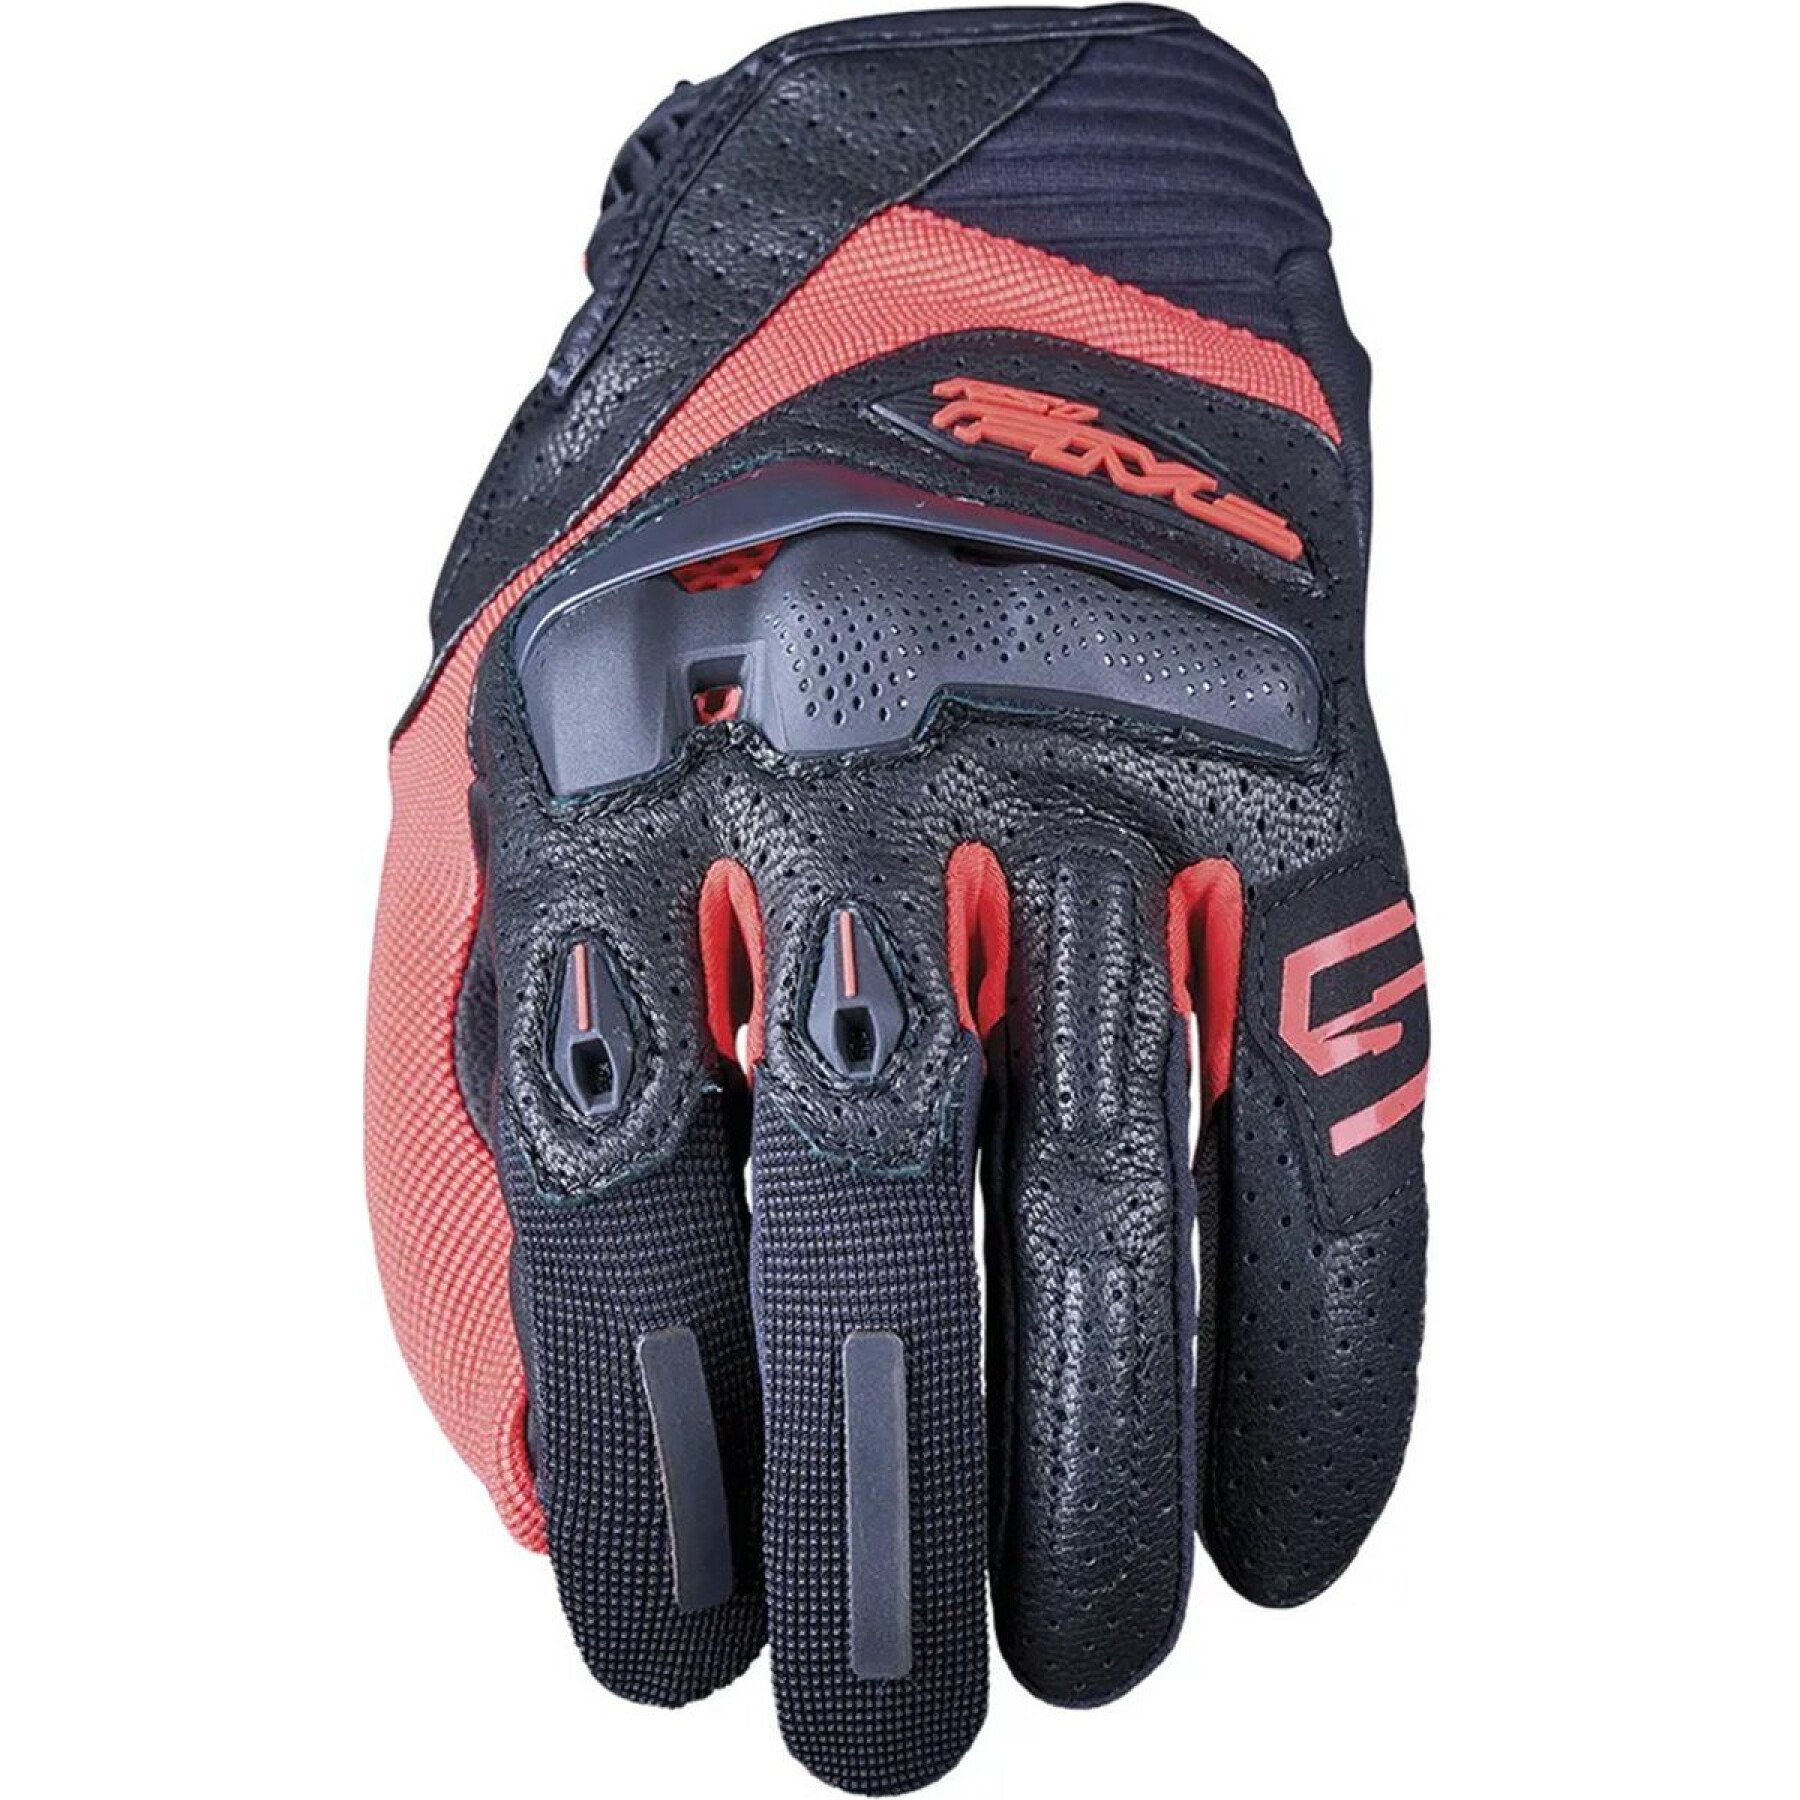 Motorcycle cross gloves Five RS1